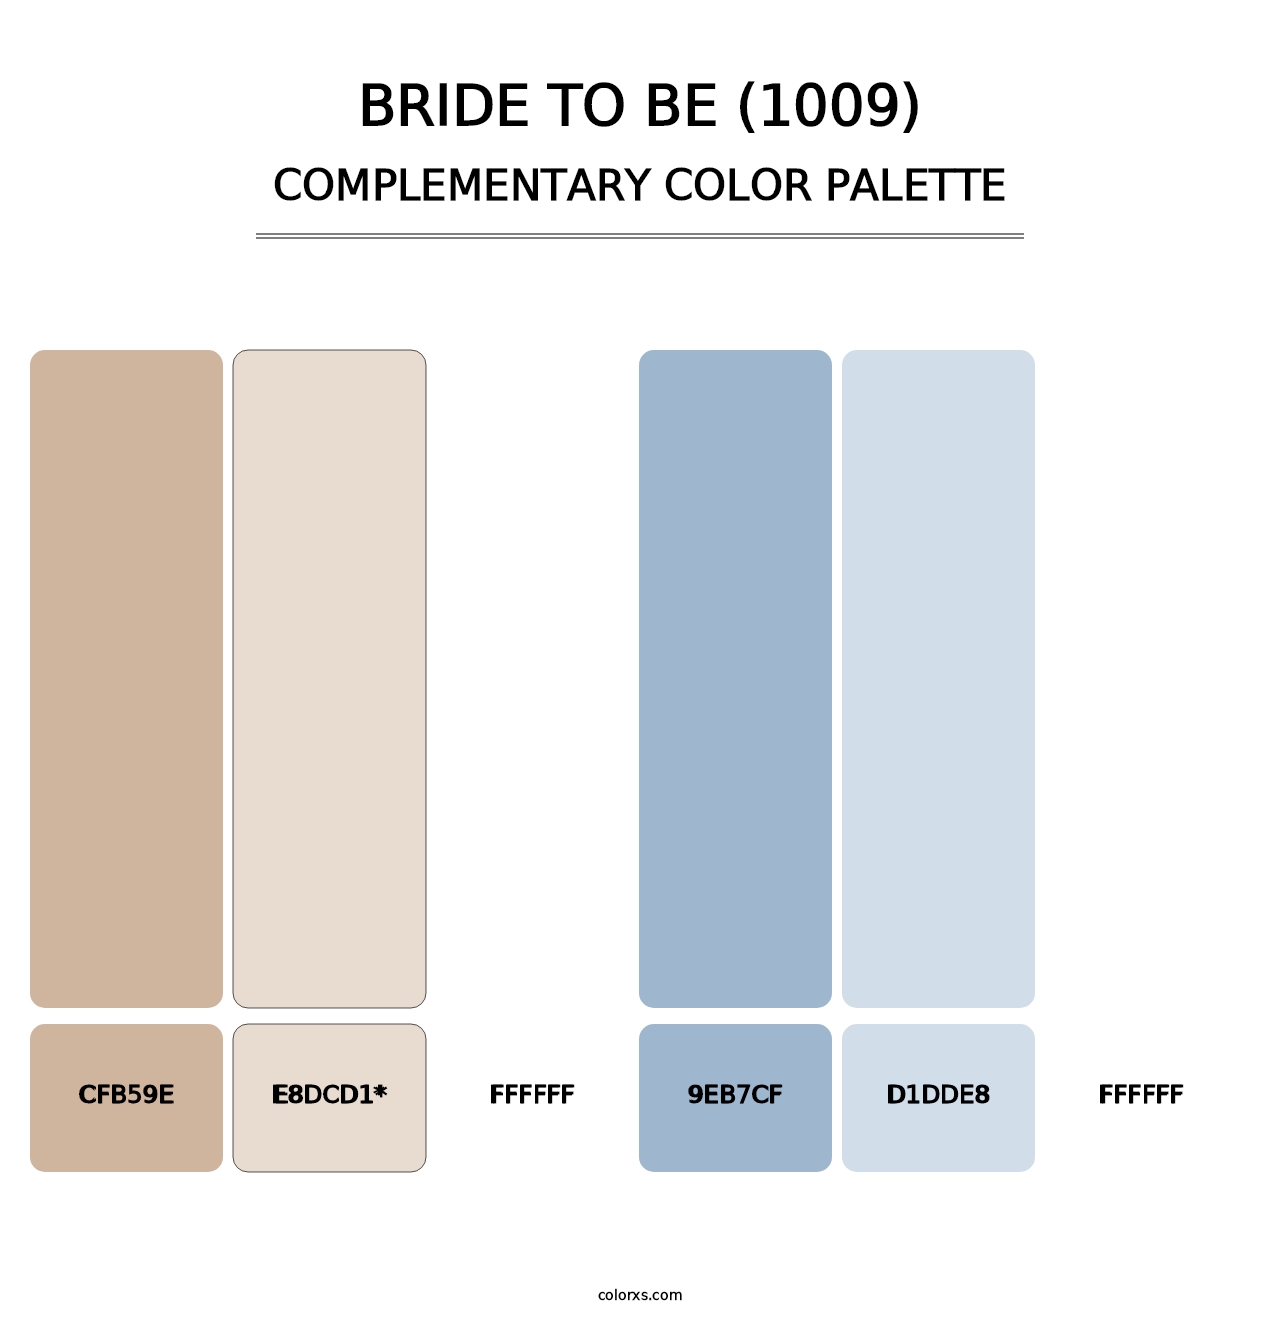 Bride To Be (1009) - Complementary Color Palette